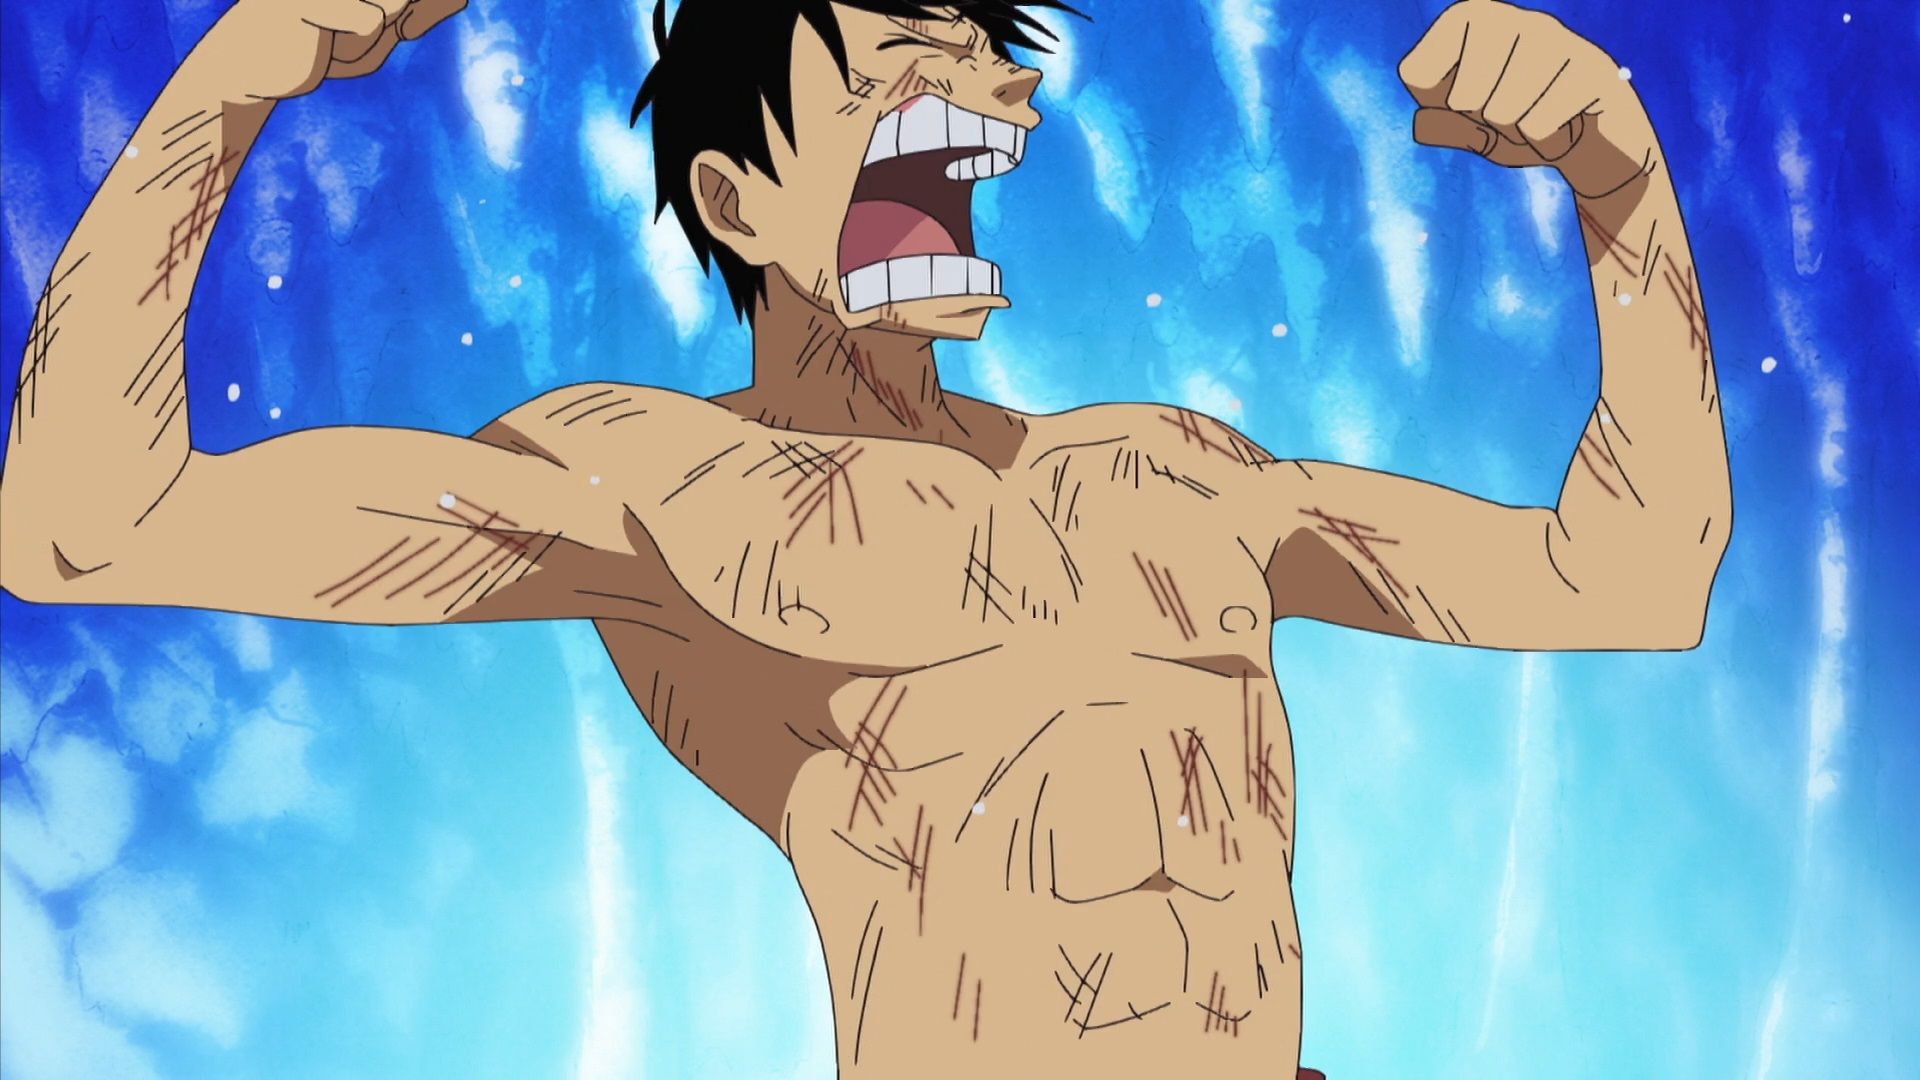 Luffy throws up his arms while baring his teeth in One Piece.